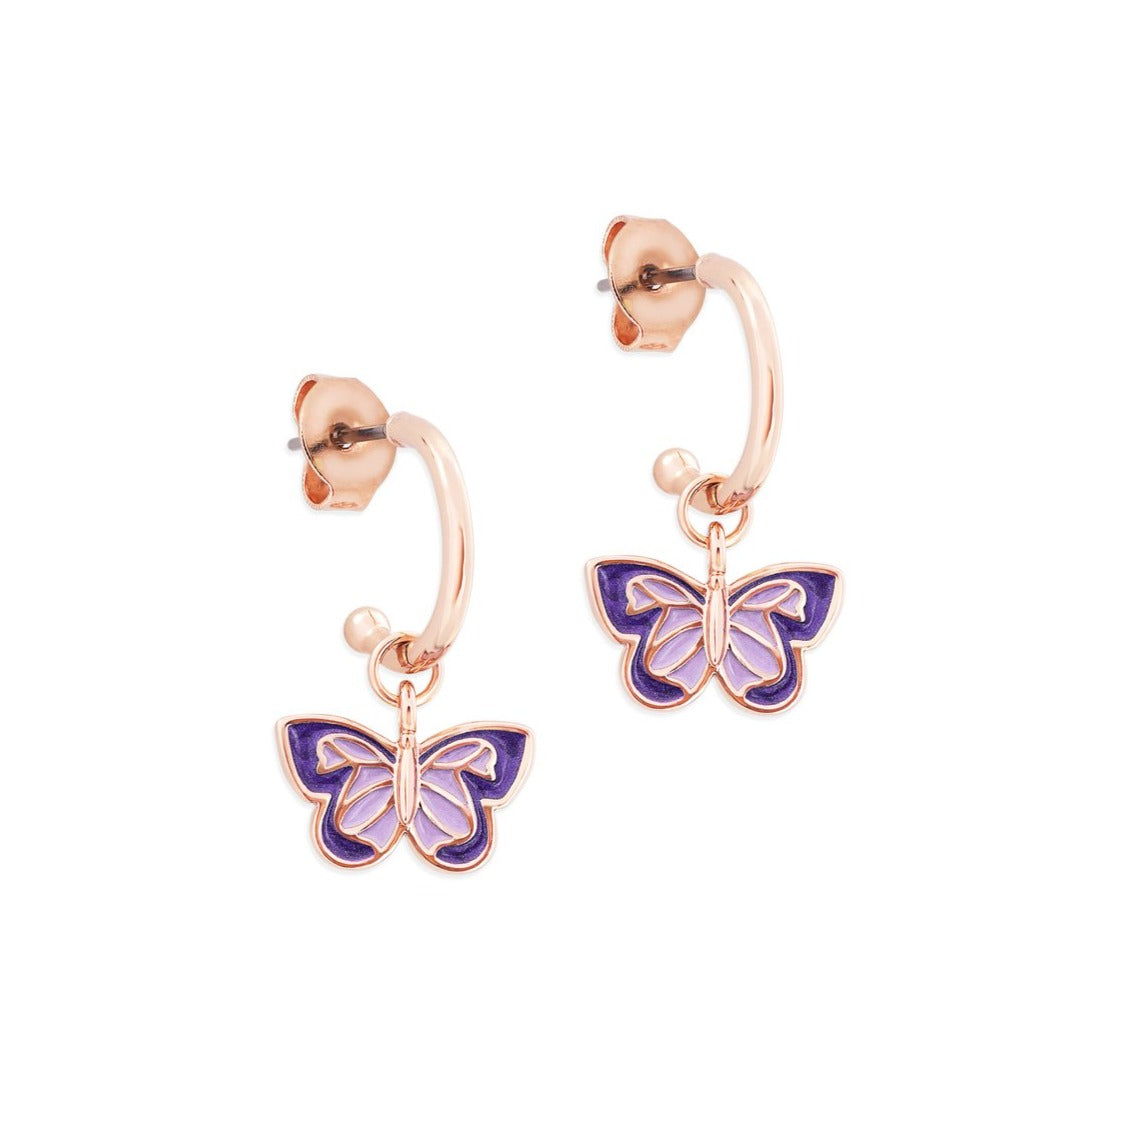 Tipperary Crystal Butterfly Loop Bar Earrings  Crafted in sleek polished rose gold with pearlescent dark purple & lilac enamel infill. These earrings secure comfortably with push backs.